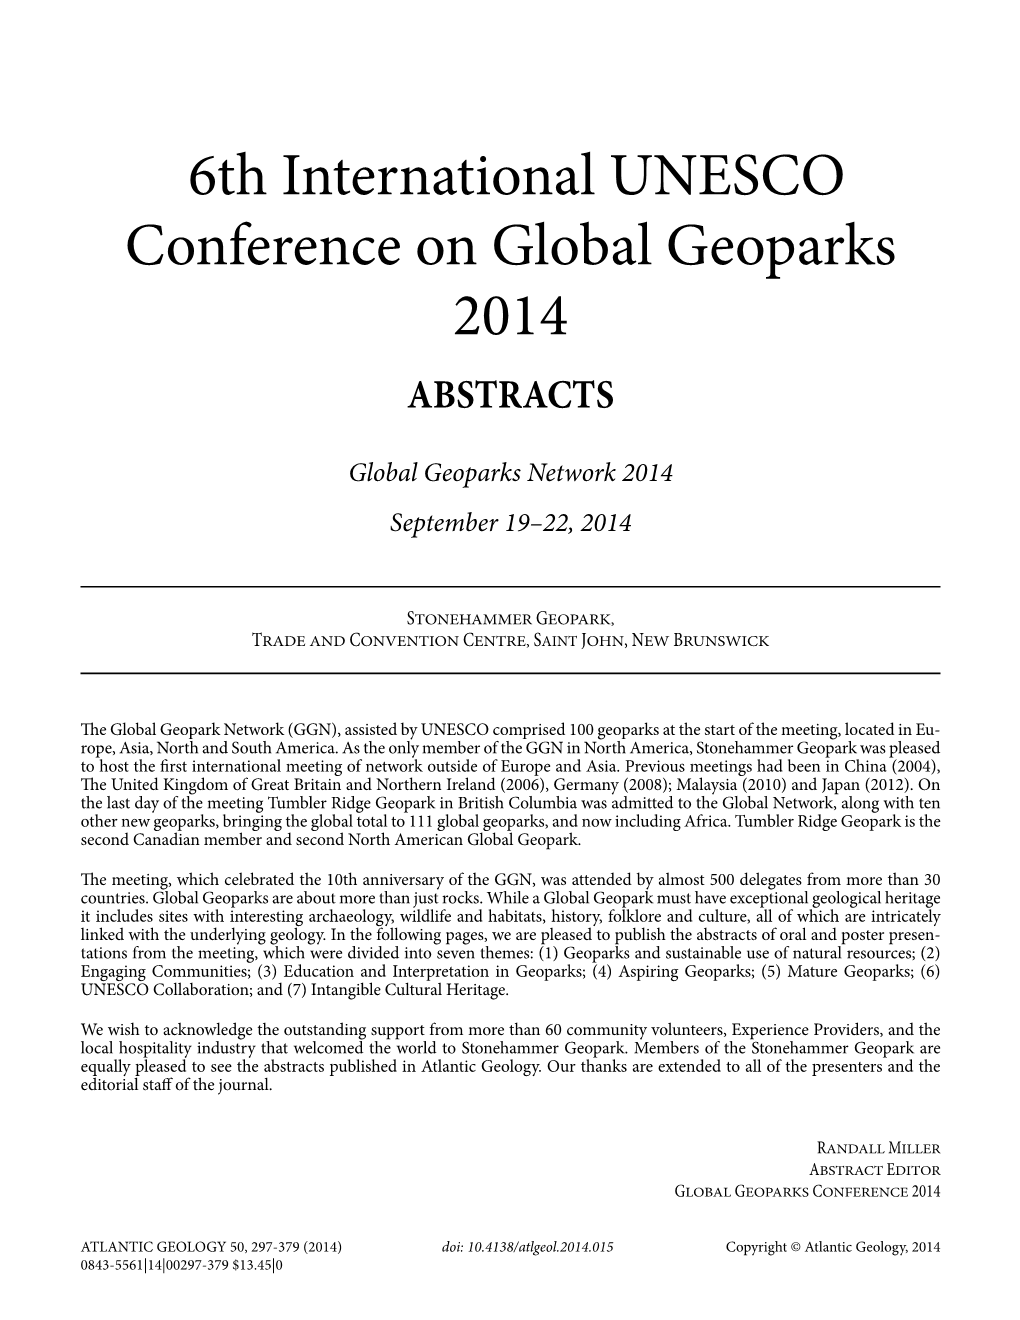 6Th International UNESCO Conference on Global Geoparks 2014 ABSTRACTS